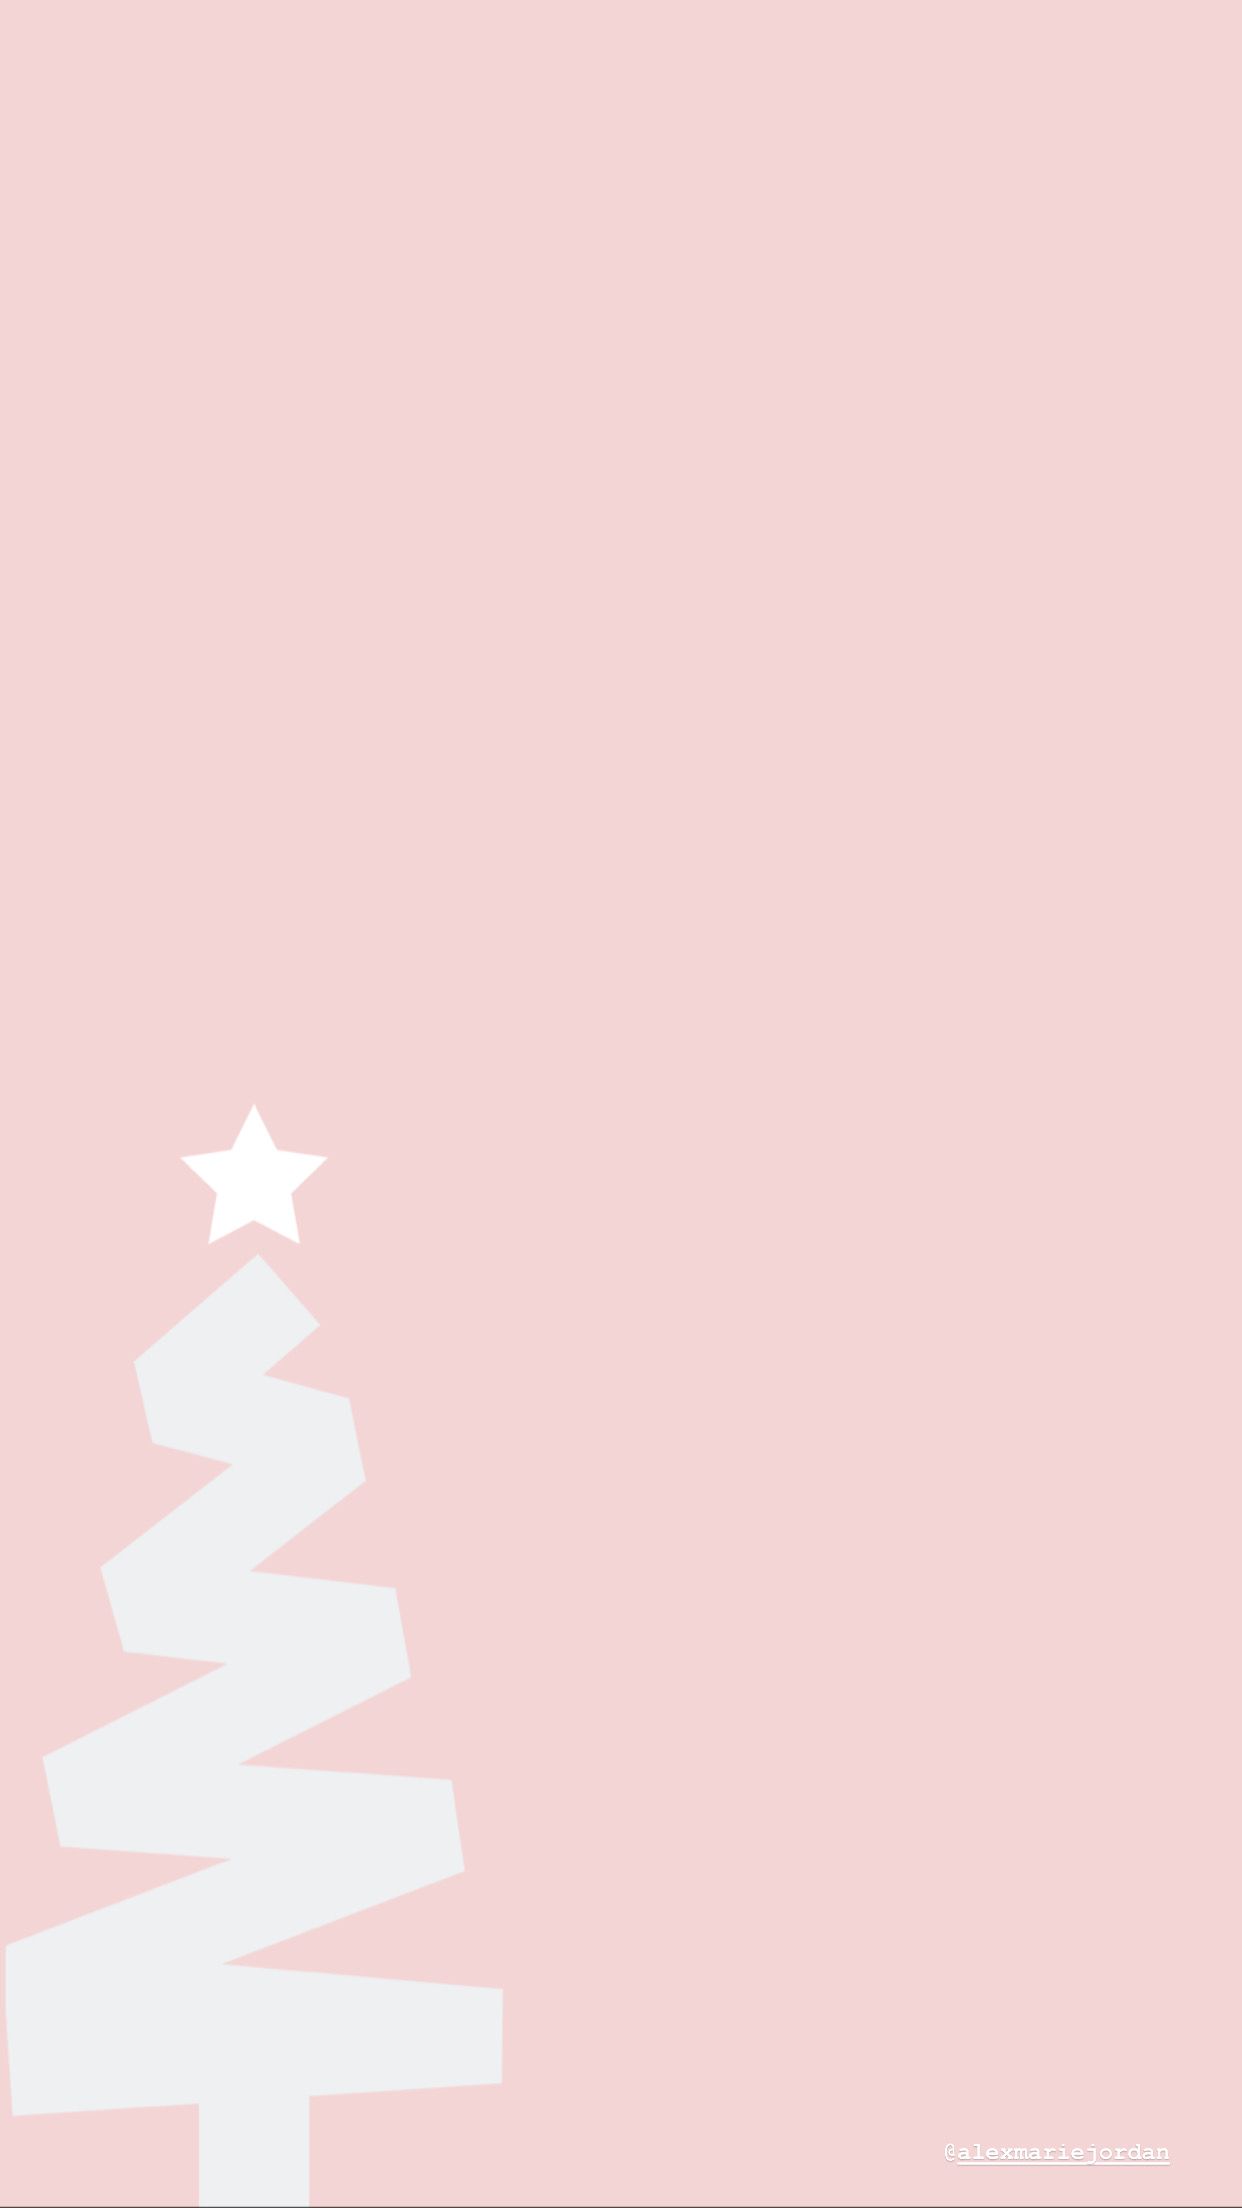 Details 52+ pink aesthetic christmas wallpaper best - in.cdgdbentre